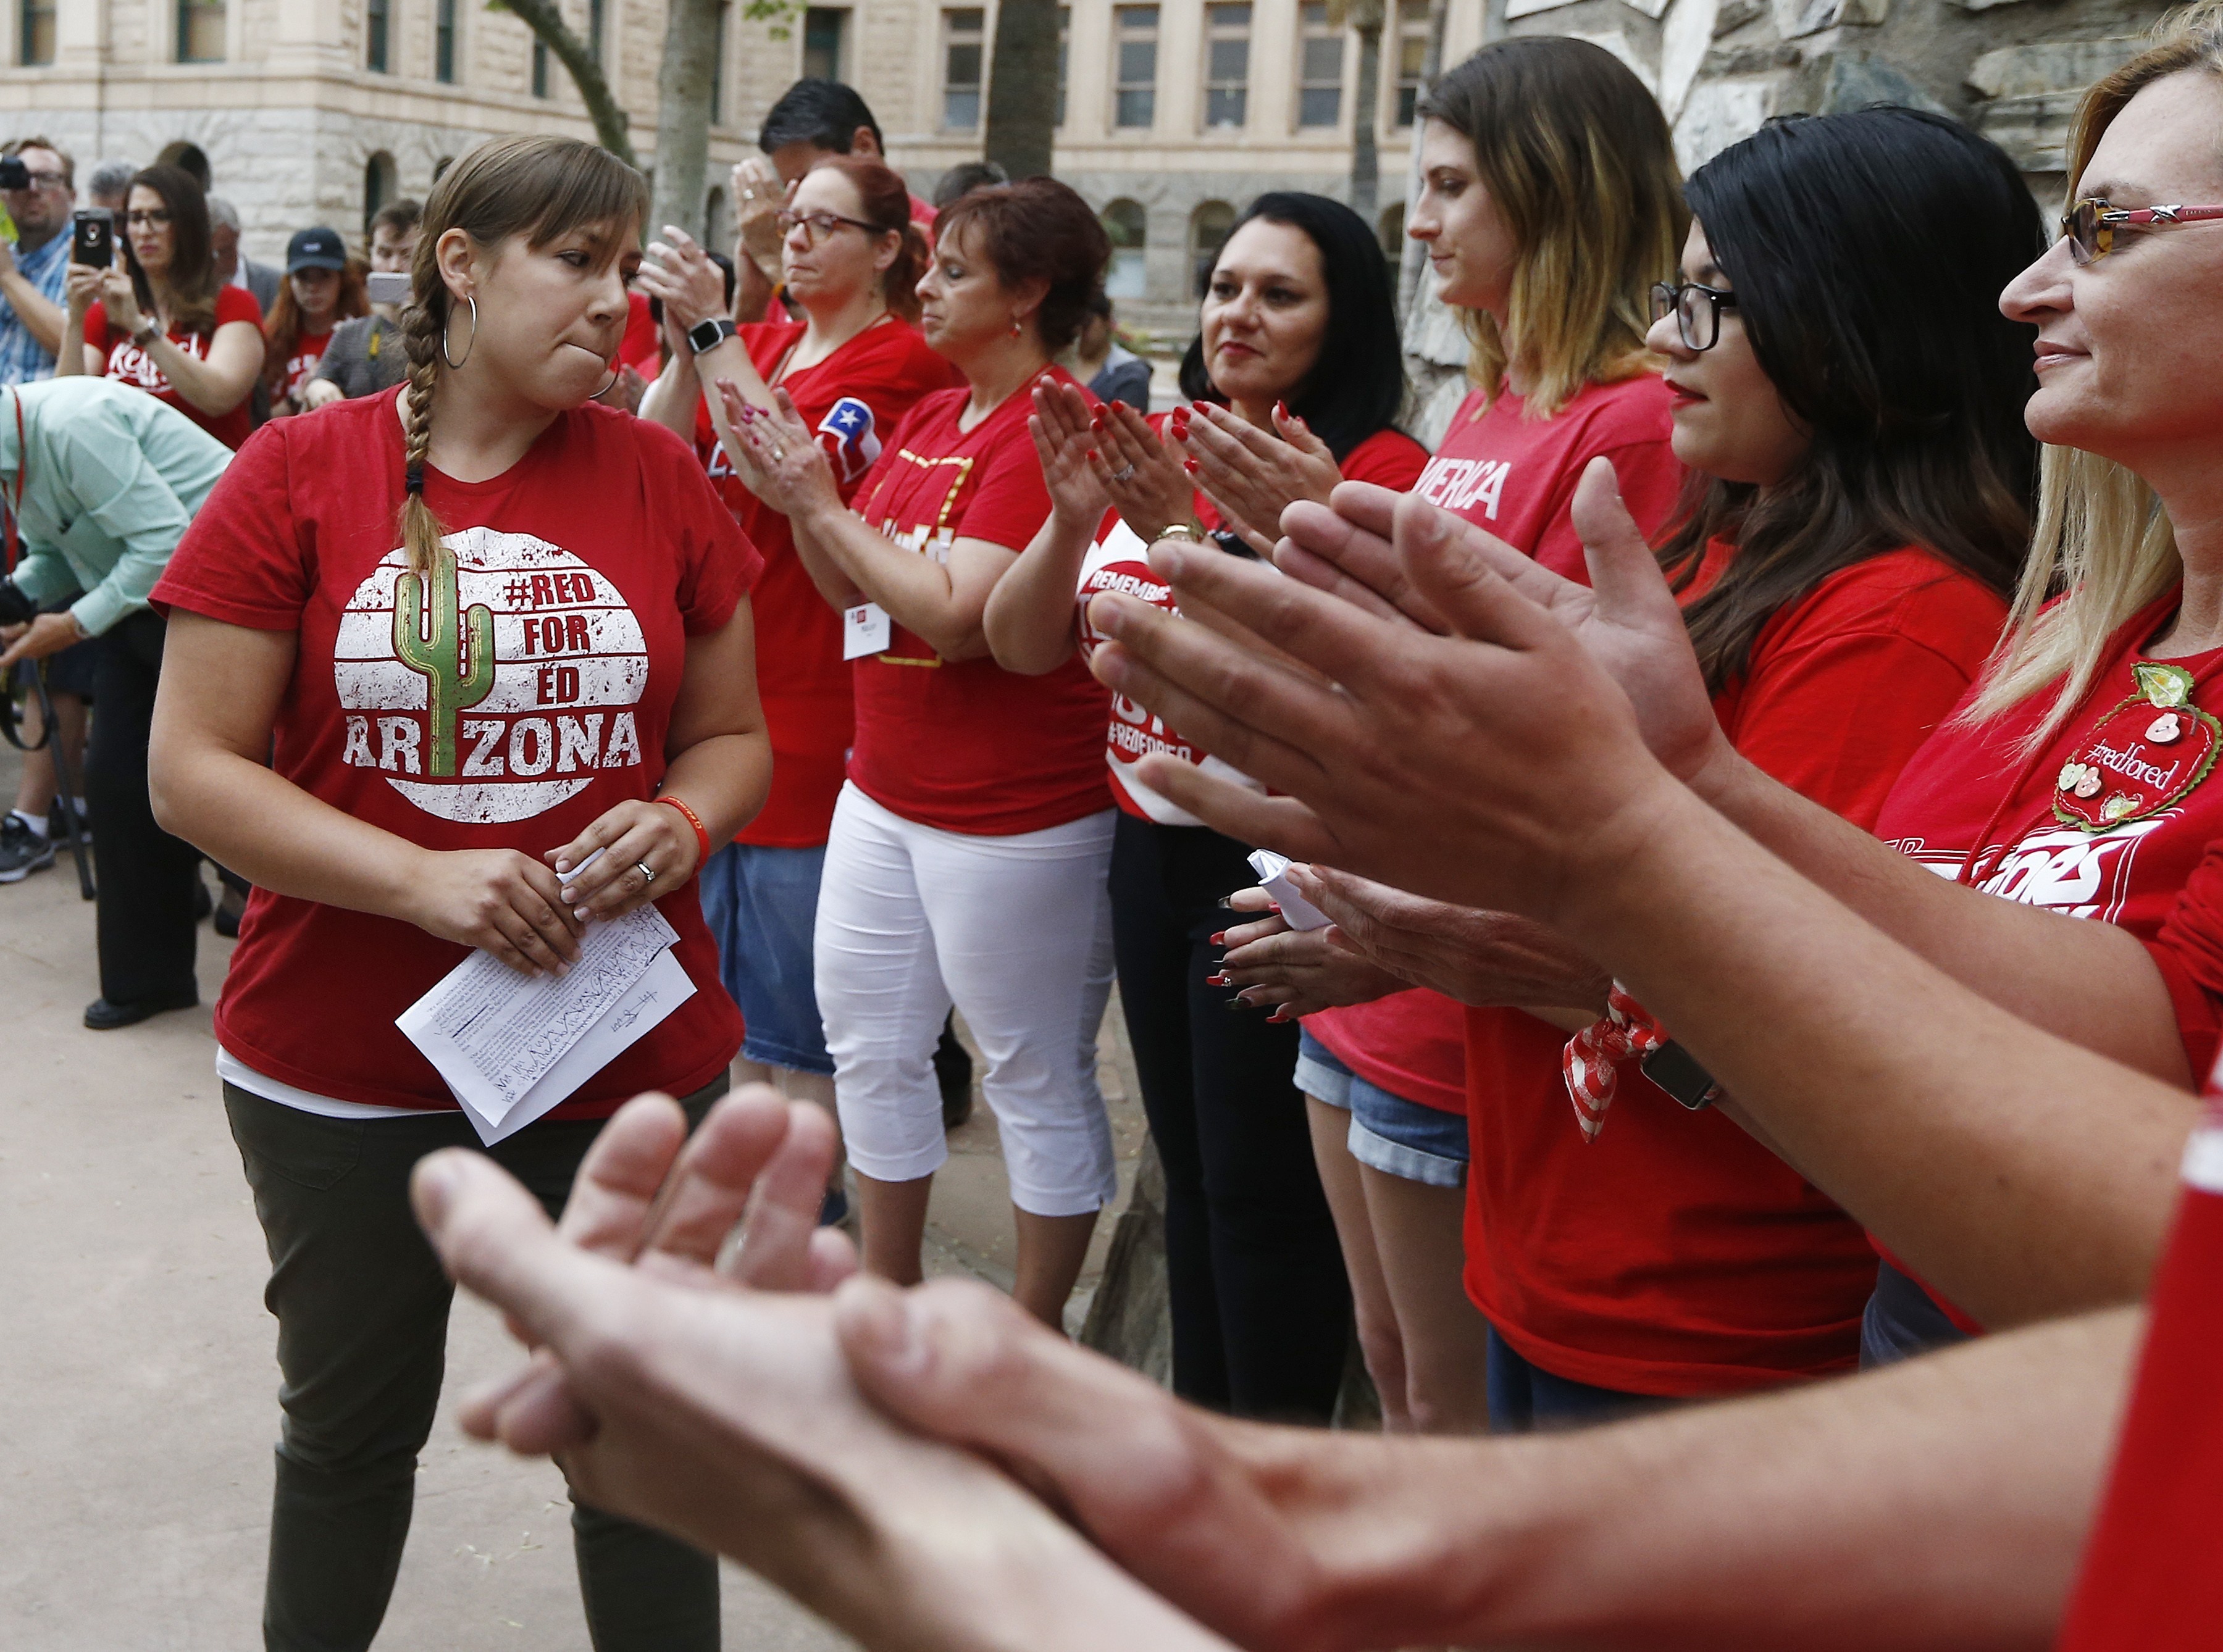 Phoenix teacher Rebecca Garelli, left, an Arizona Educators United member, is applauded after her announcement from protest organizers that teachers intend to go back to work as the statewide teachers strike enters a fourth day at the Arizona Capitol on May 1, 2018, in Phoenix. (Ross D. Franklin/AP)